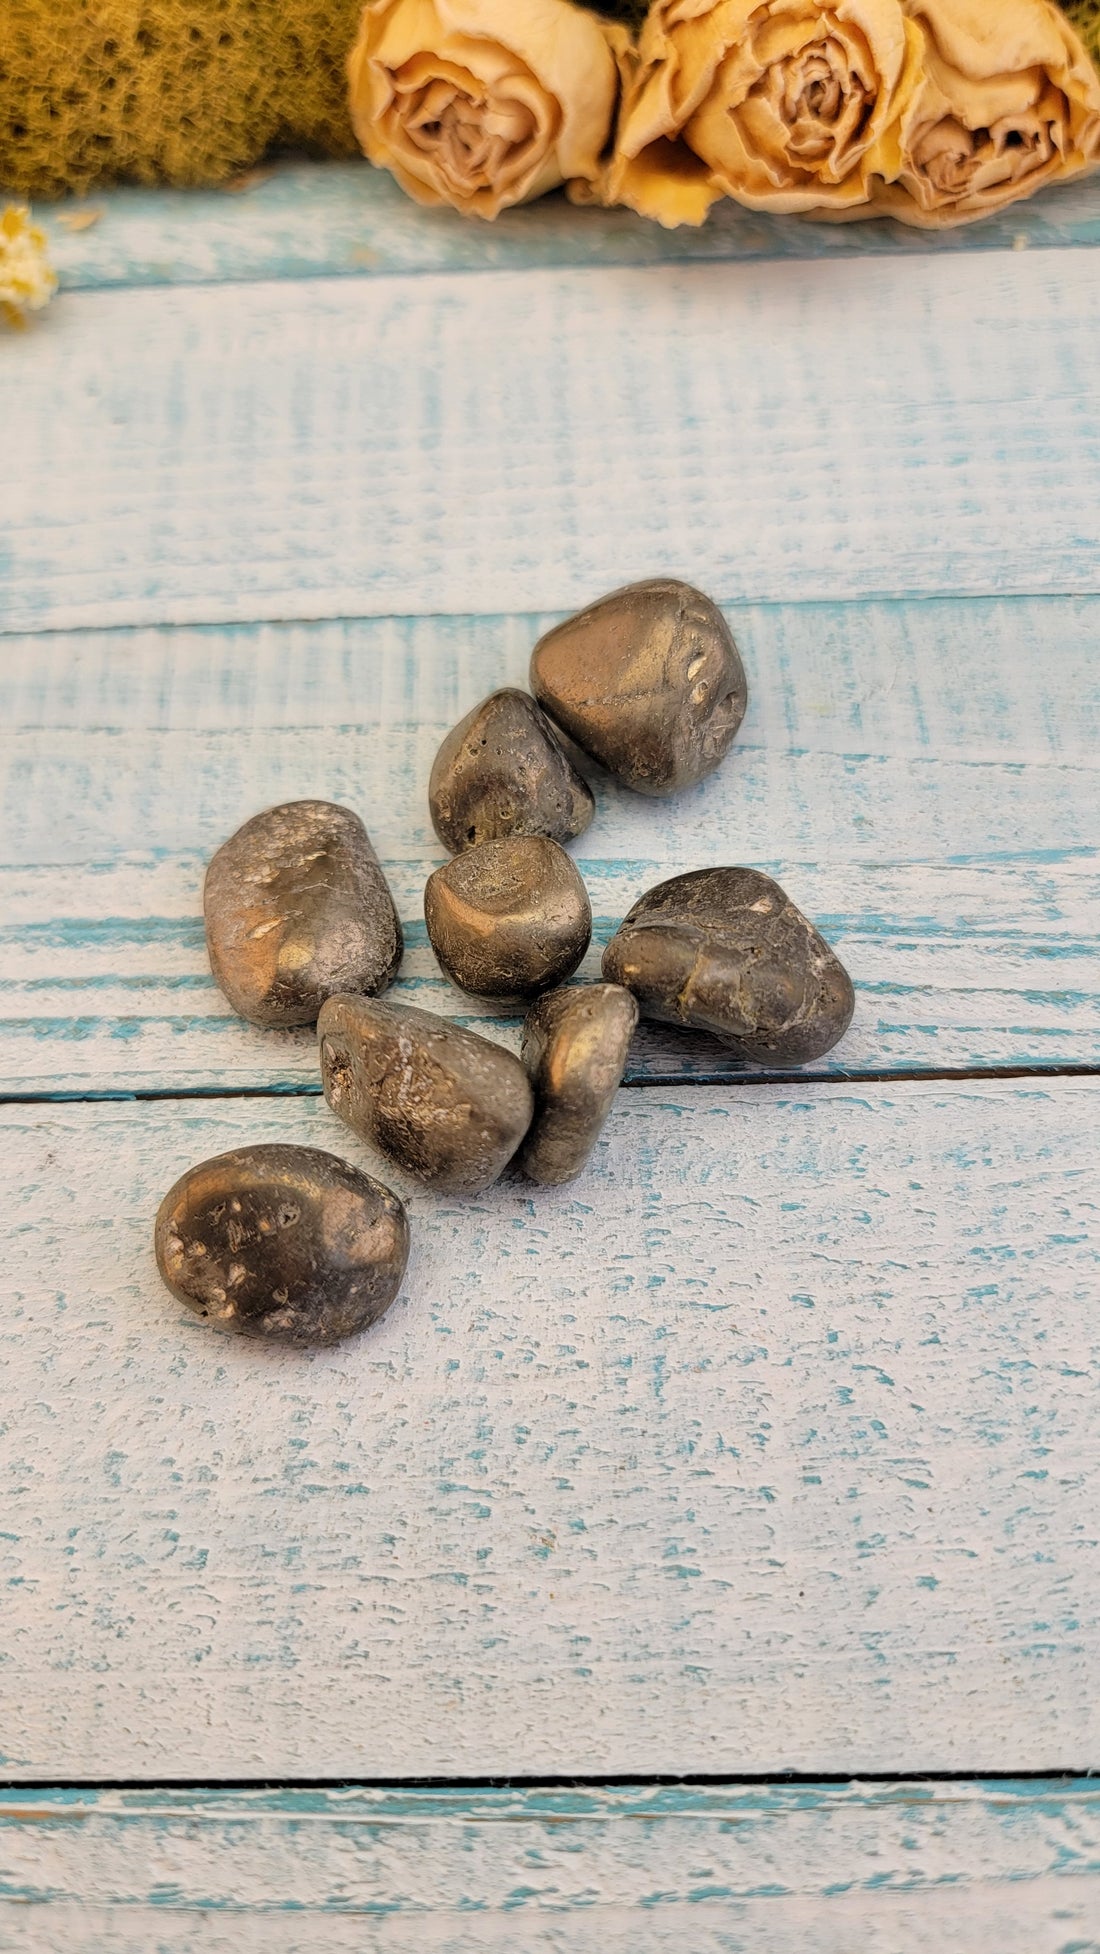 tumbled pyrite stones in hand